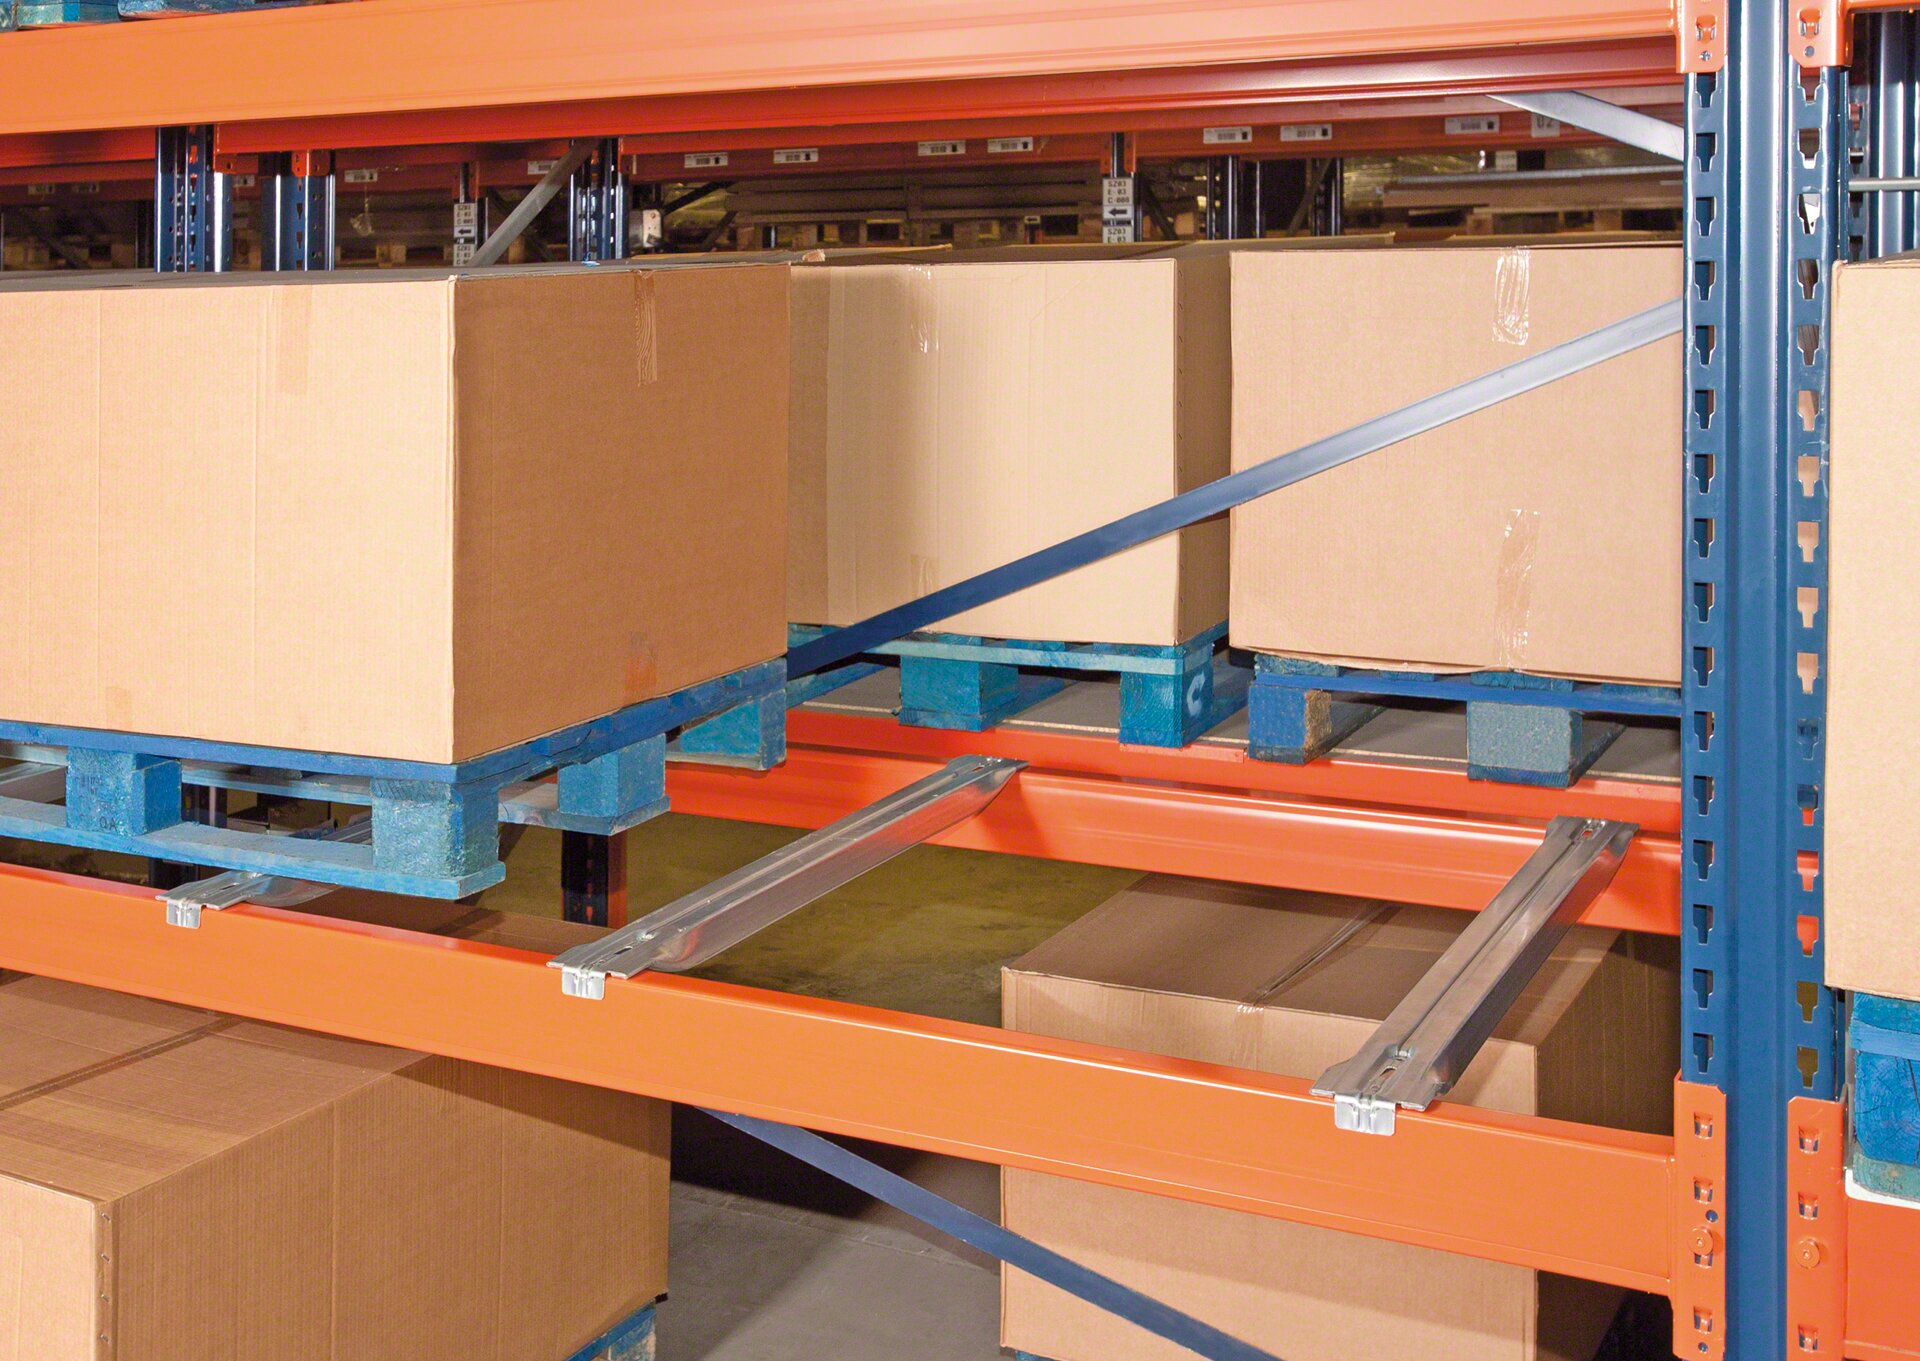 Support bars enable the storage of pallets with bottom deckboards parallel to the beams